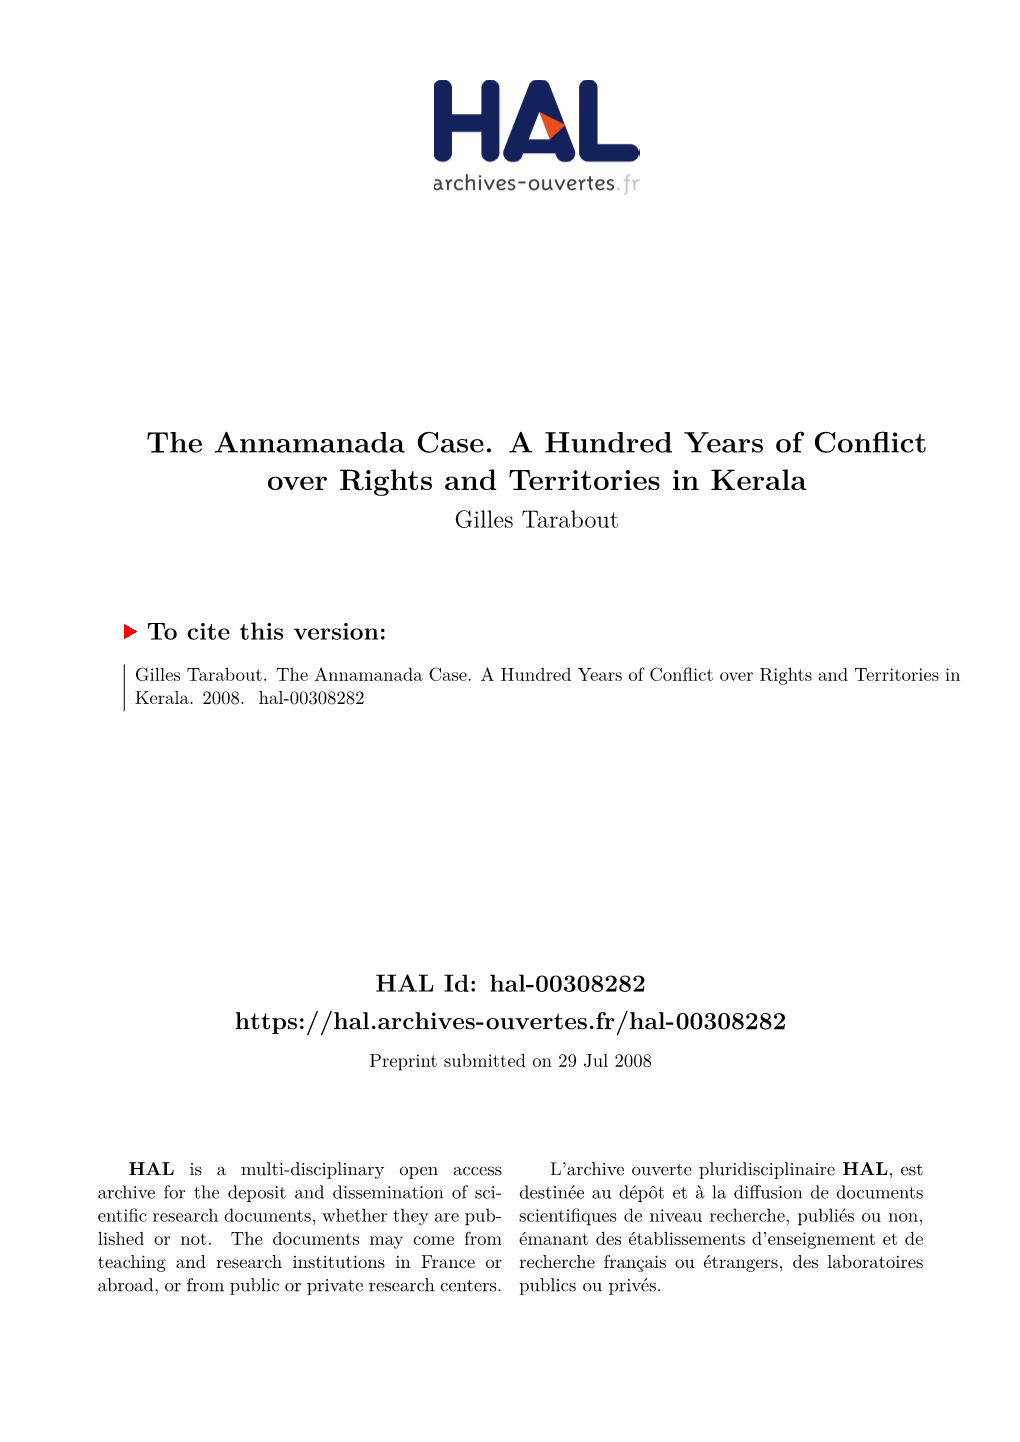 The Annamanada Case. a Hundred Years of Conflict Over Rights and Territories in Kerala Gilles Tarabout